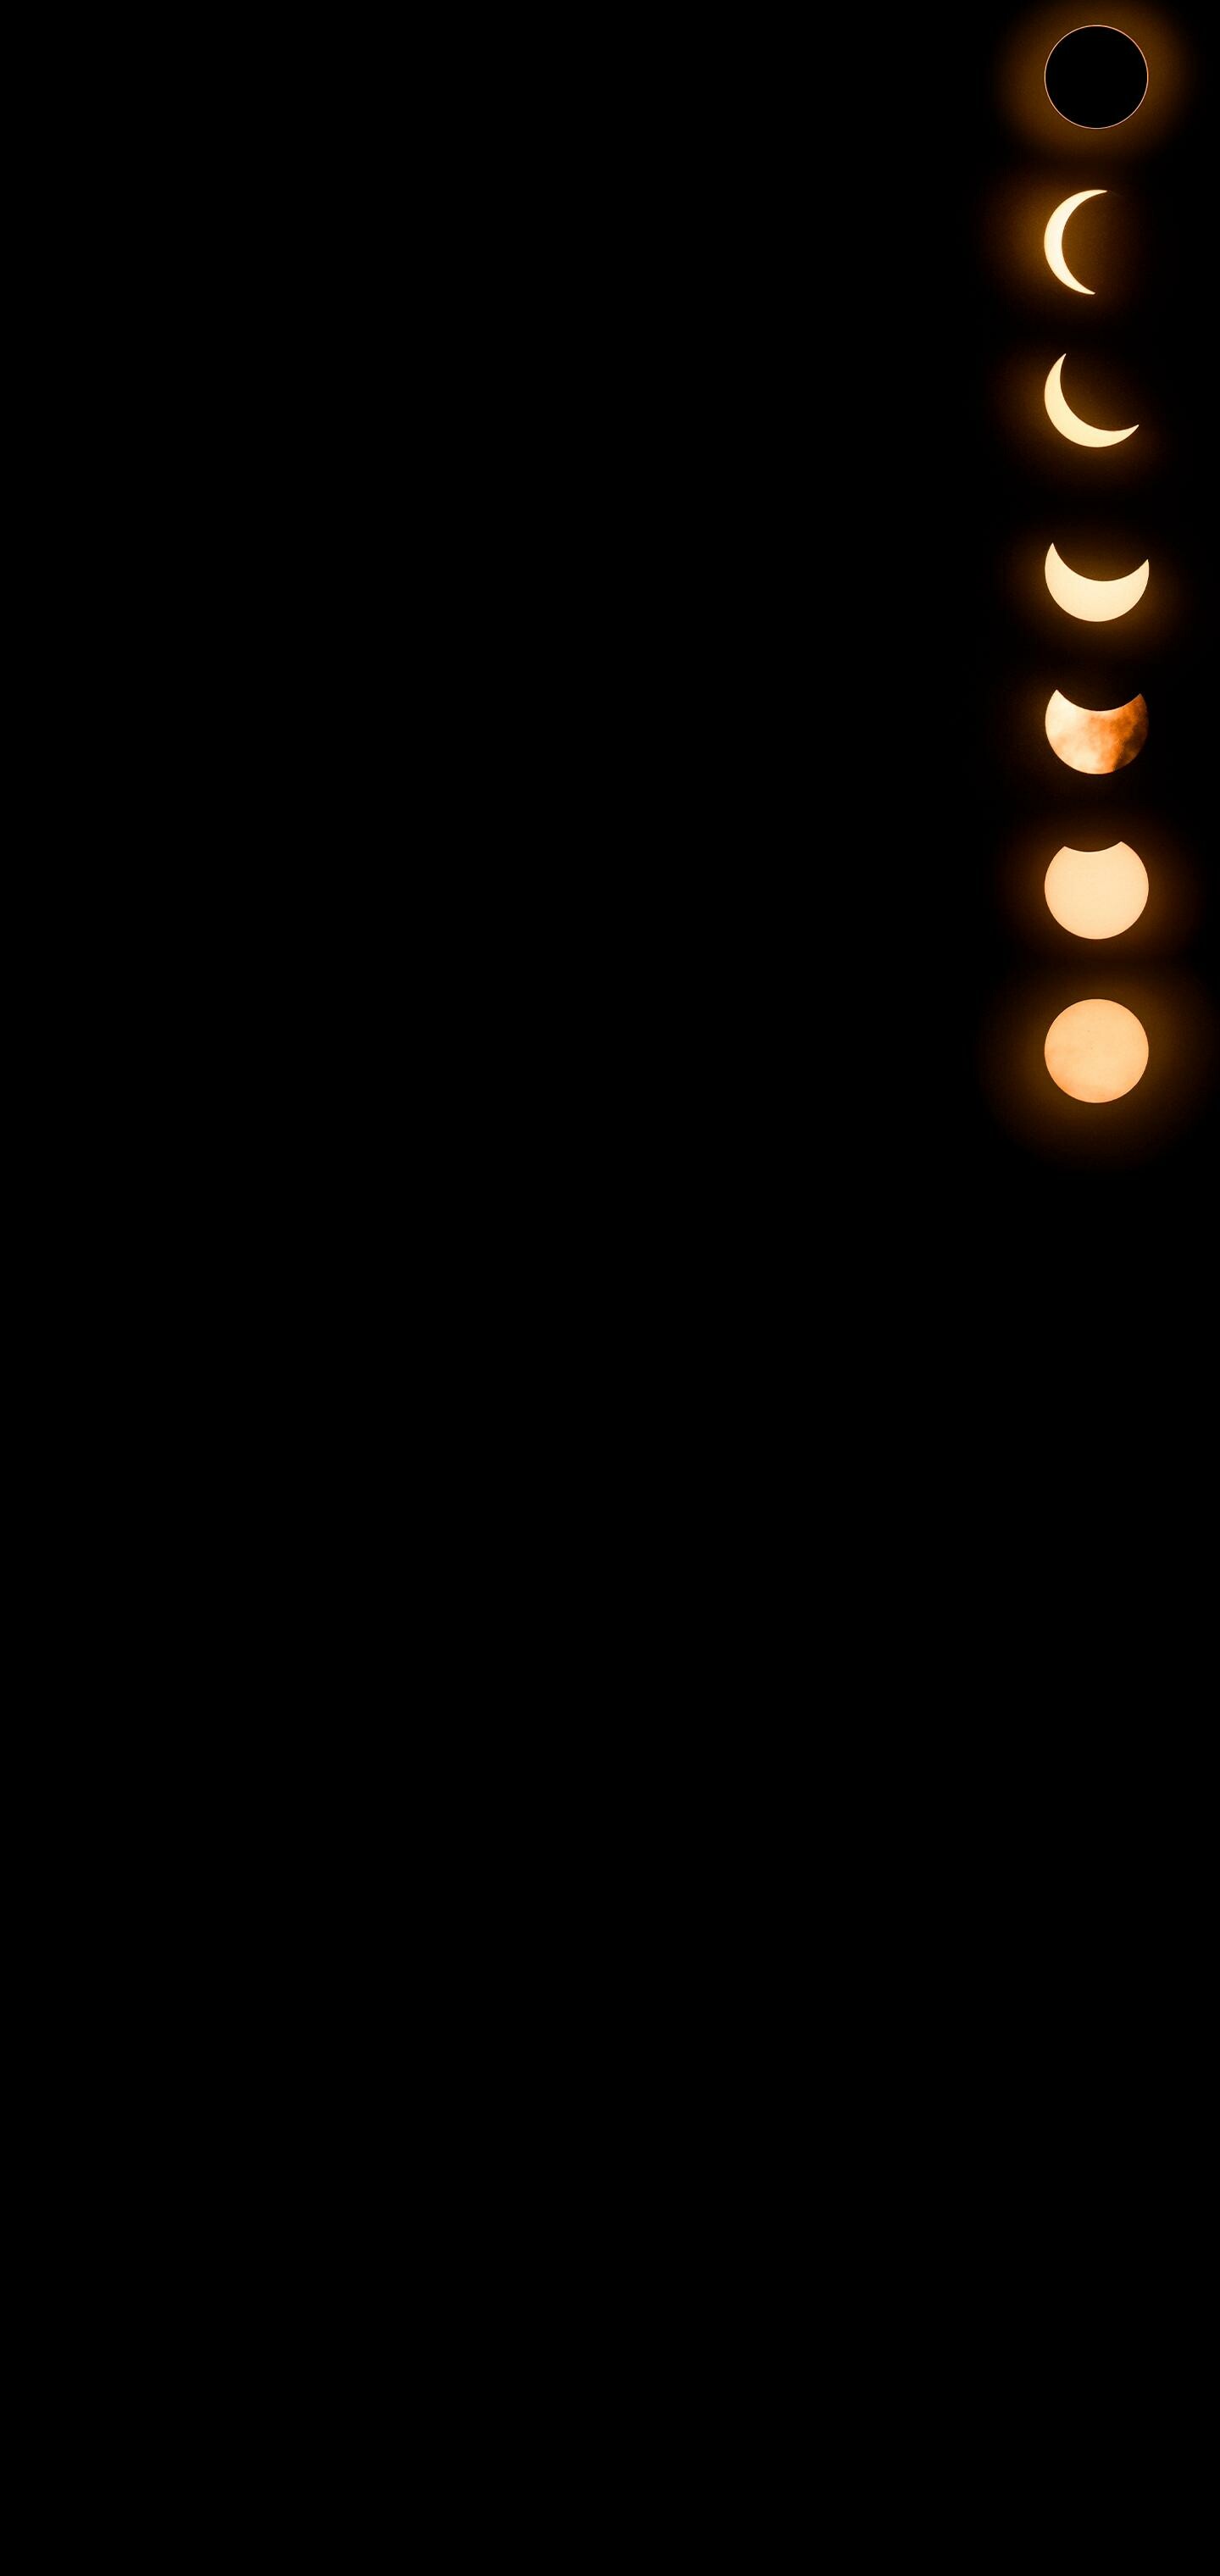 Solar eclipse progression, Celestial journey, Galaxy S10 hole punch wallpaper, Astral spectacle, 1440x3040 HD Phone